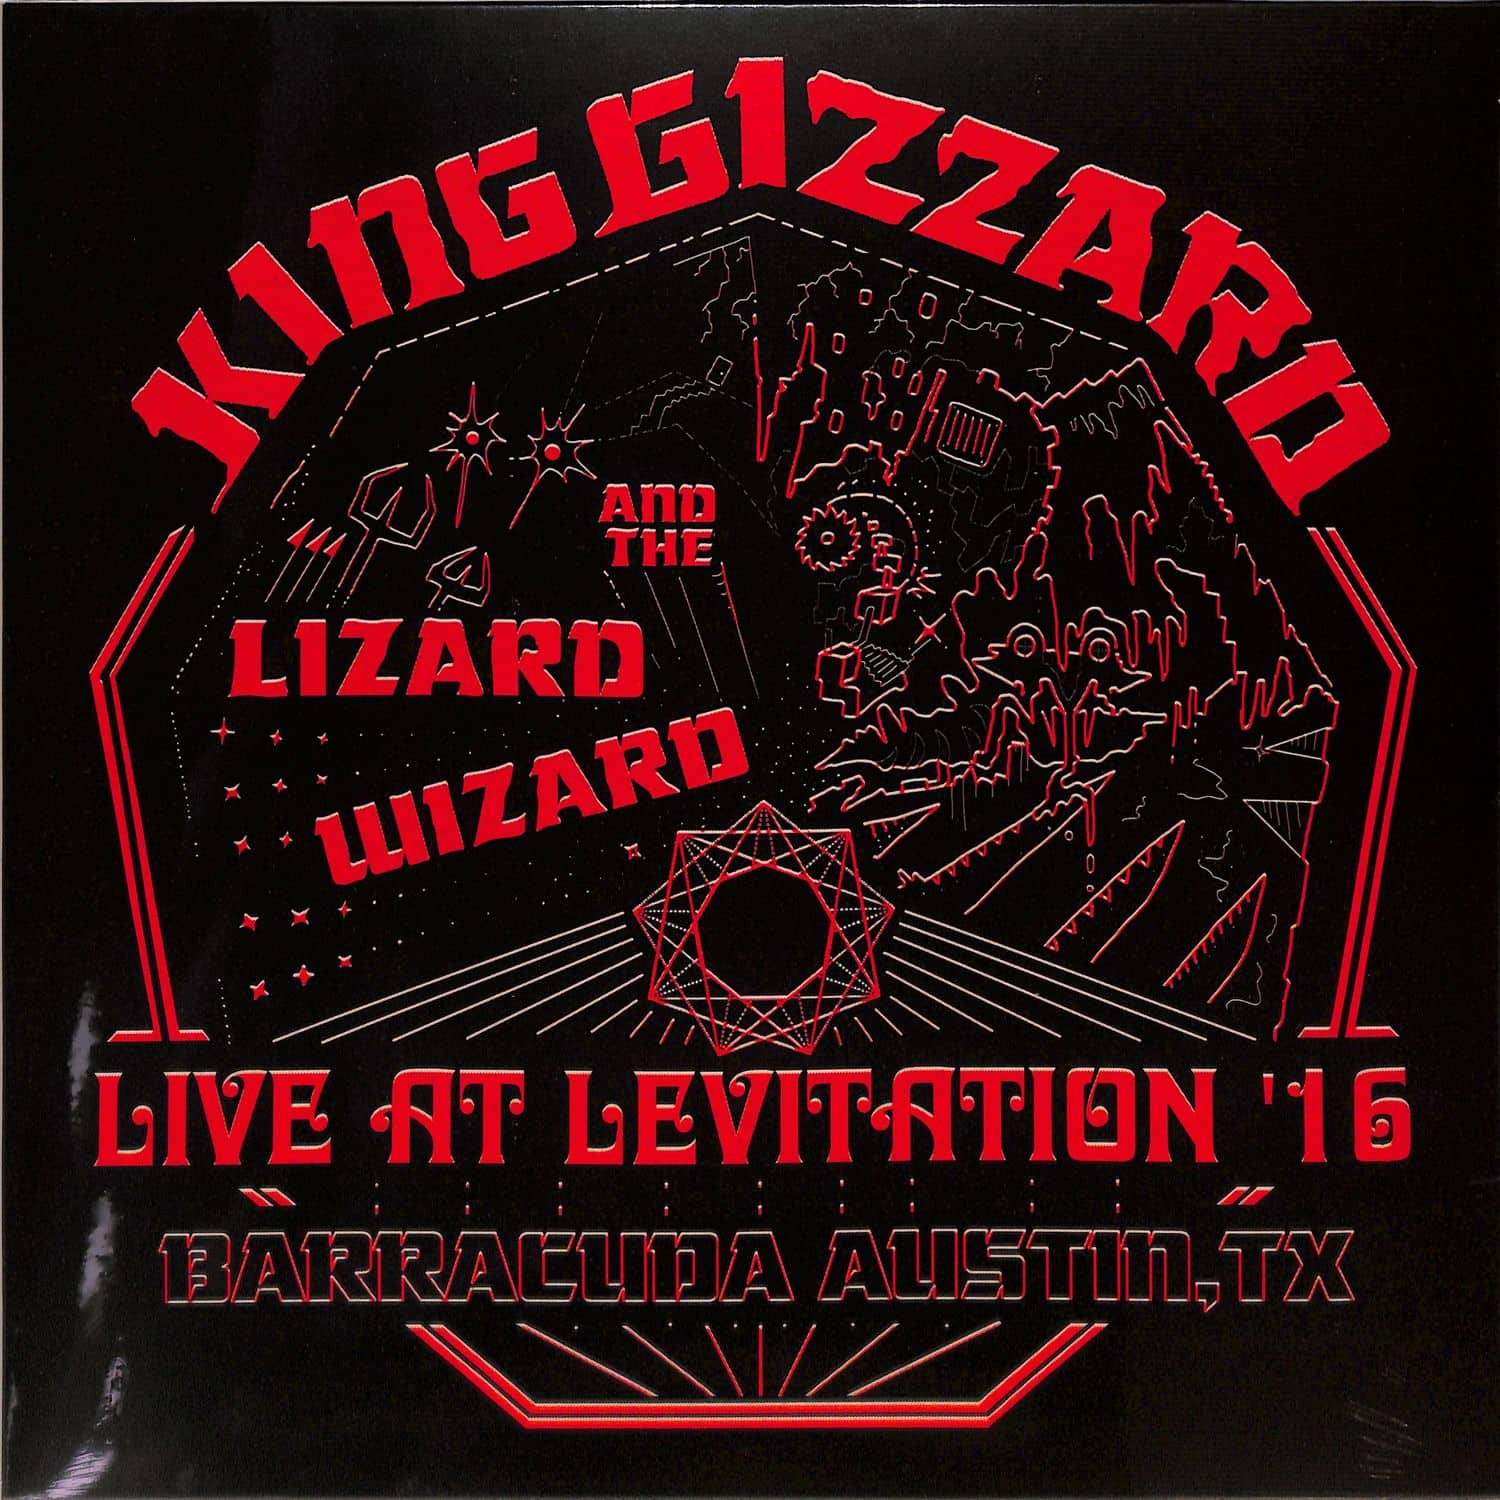 King Gizzard & The Lizard Wizard - LIVE AT LEVITATION 16 